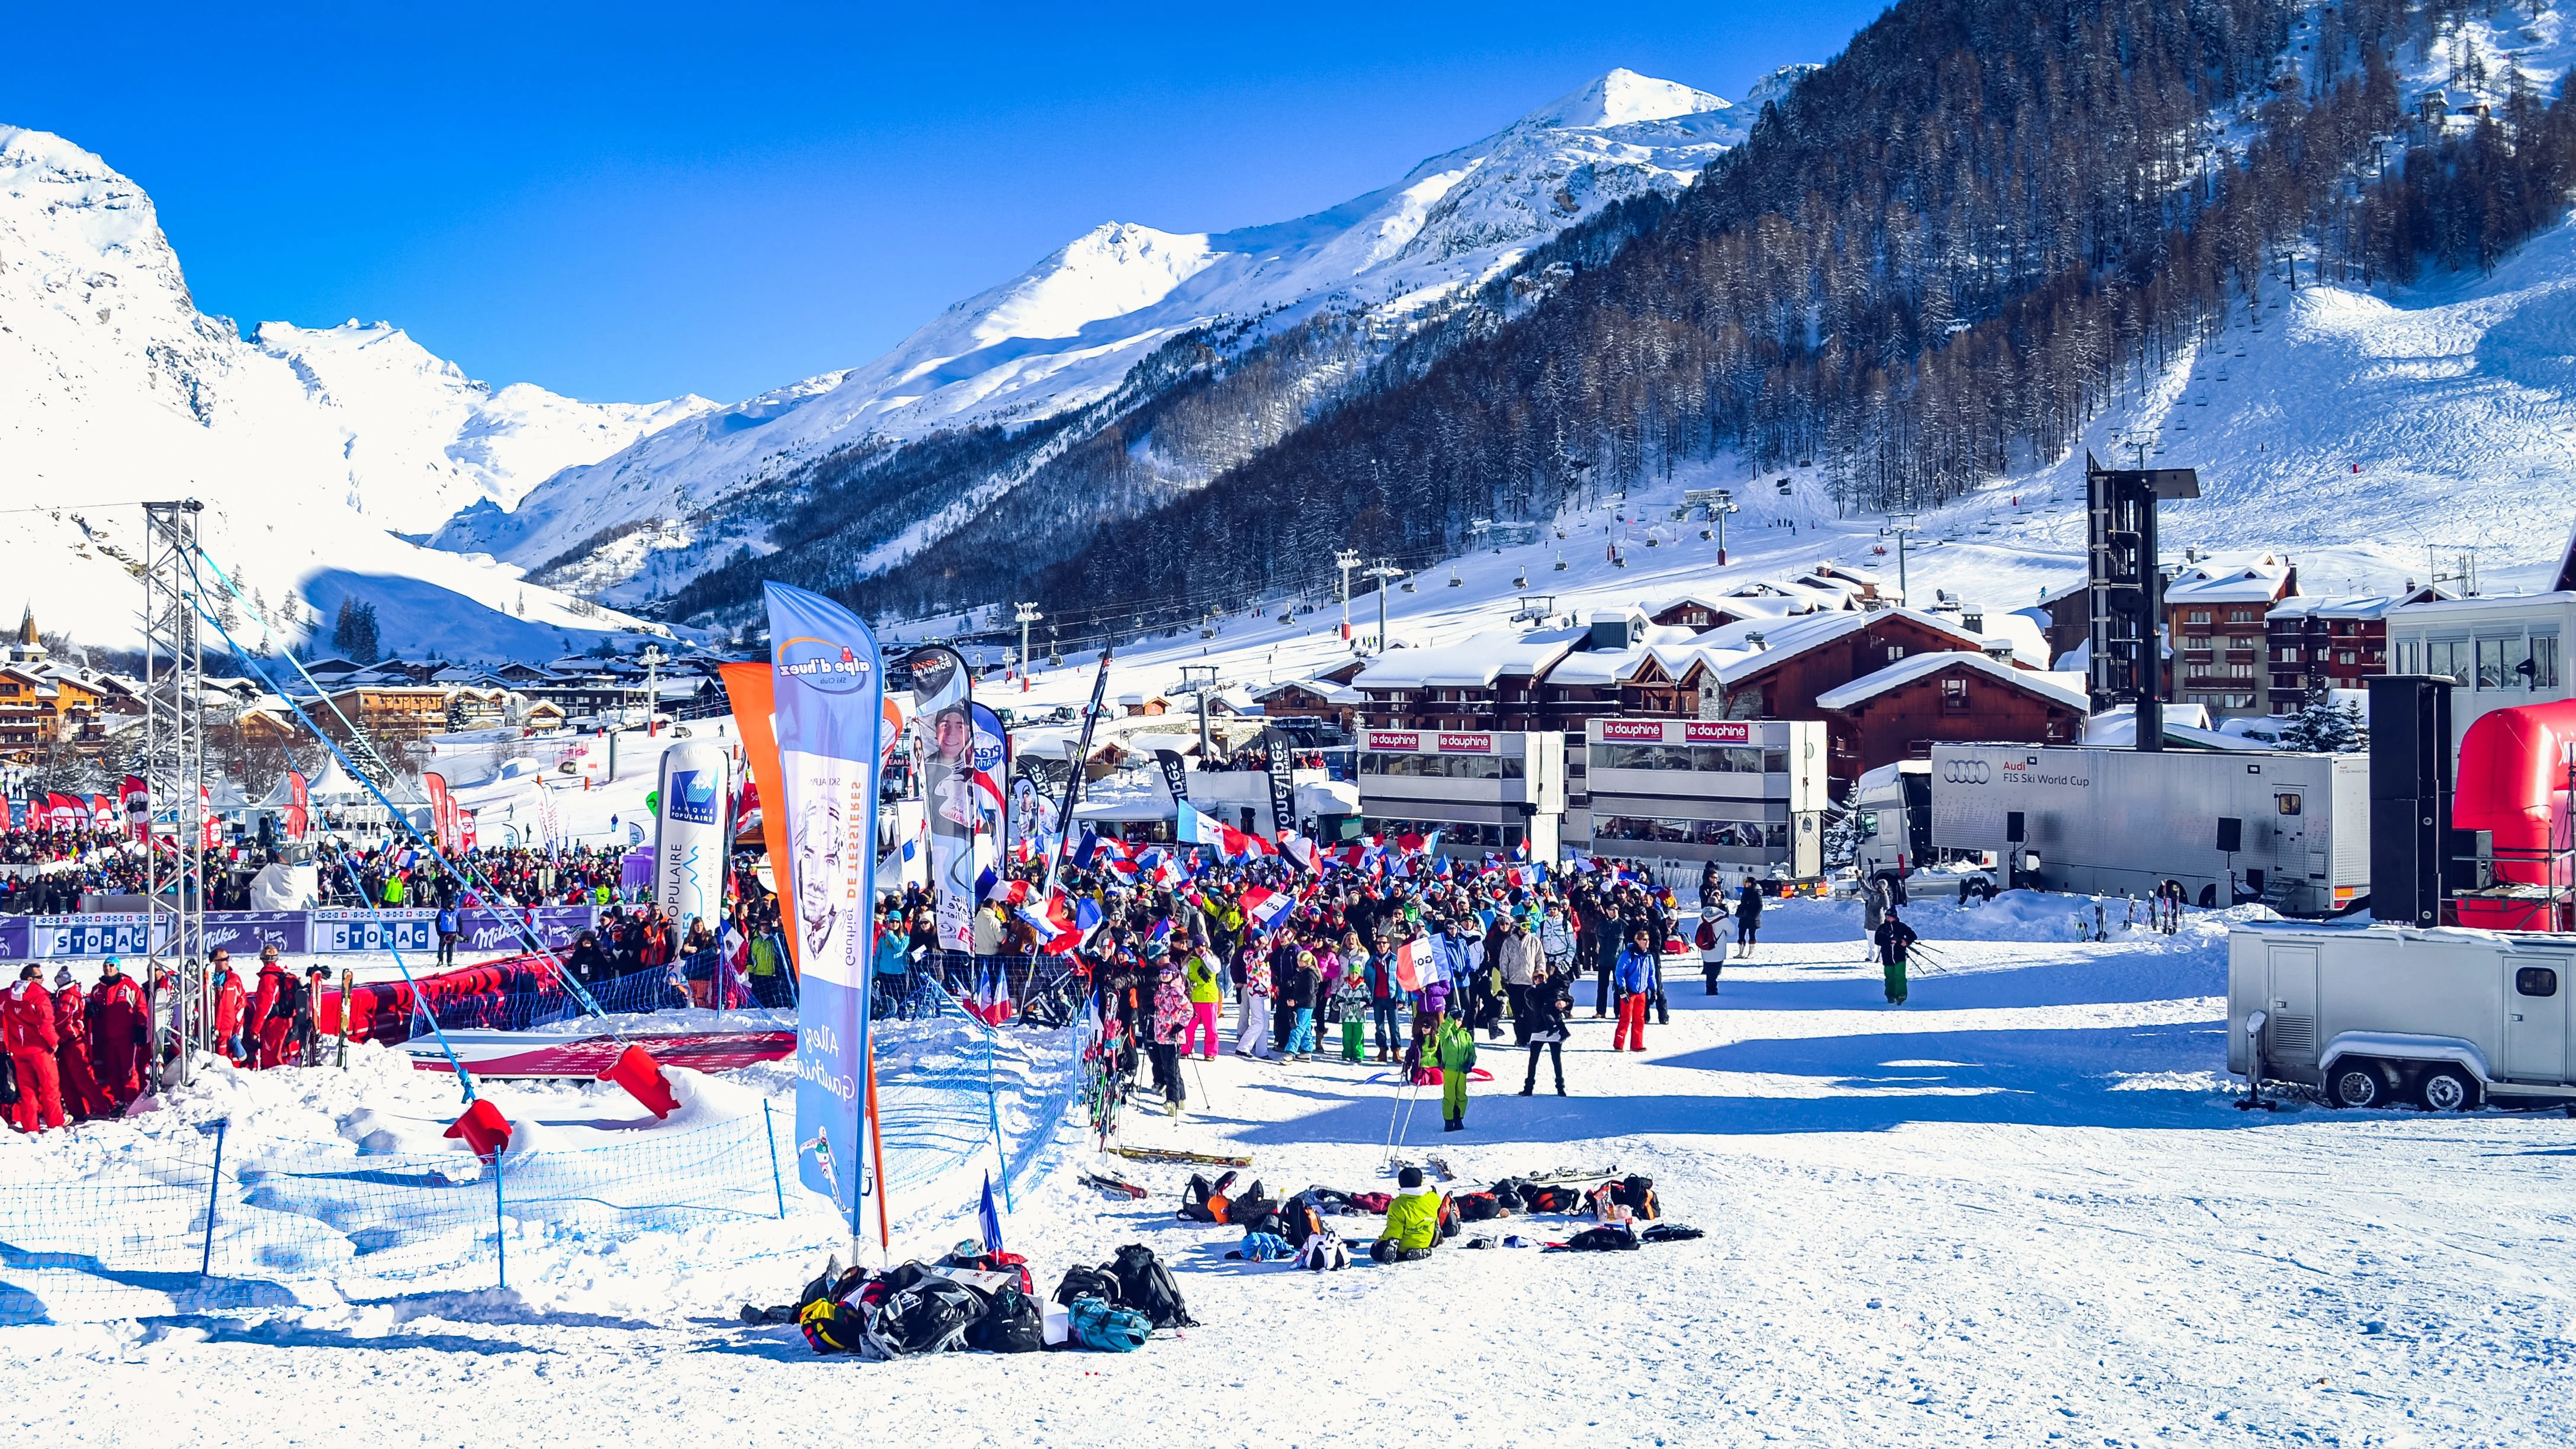 Val d'Isère : Alps ski resort and winter sports – Val d'Isère ski area